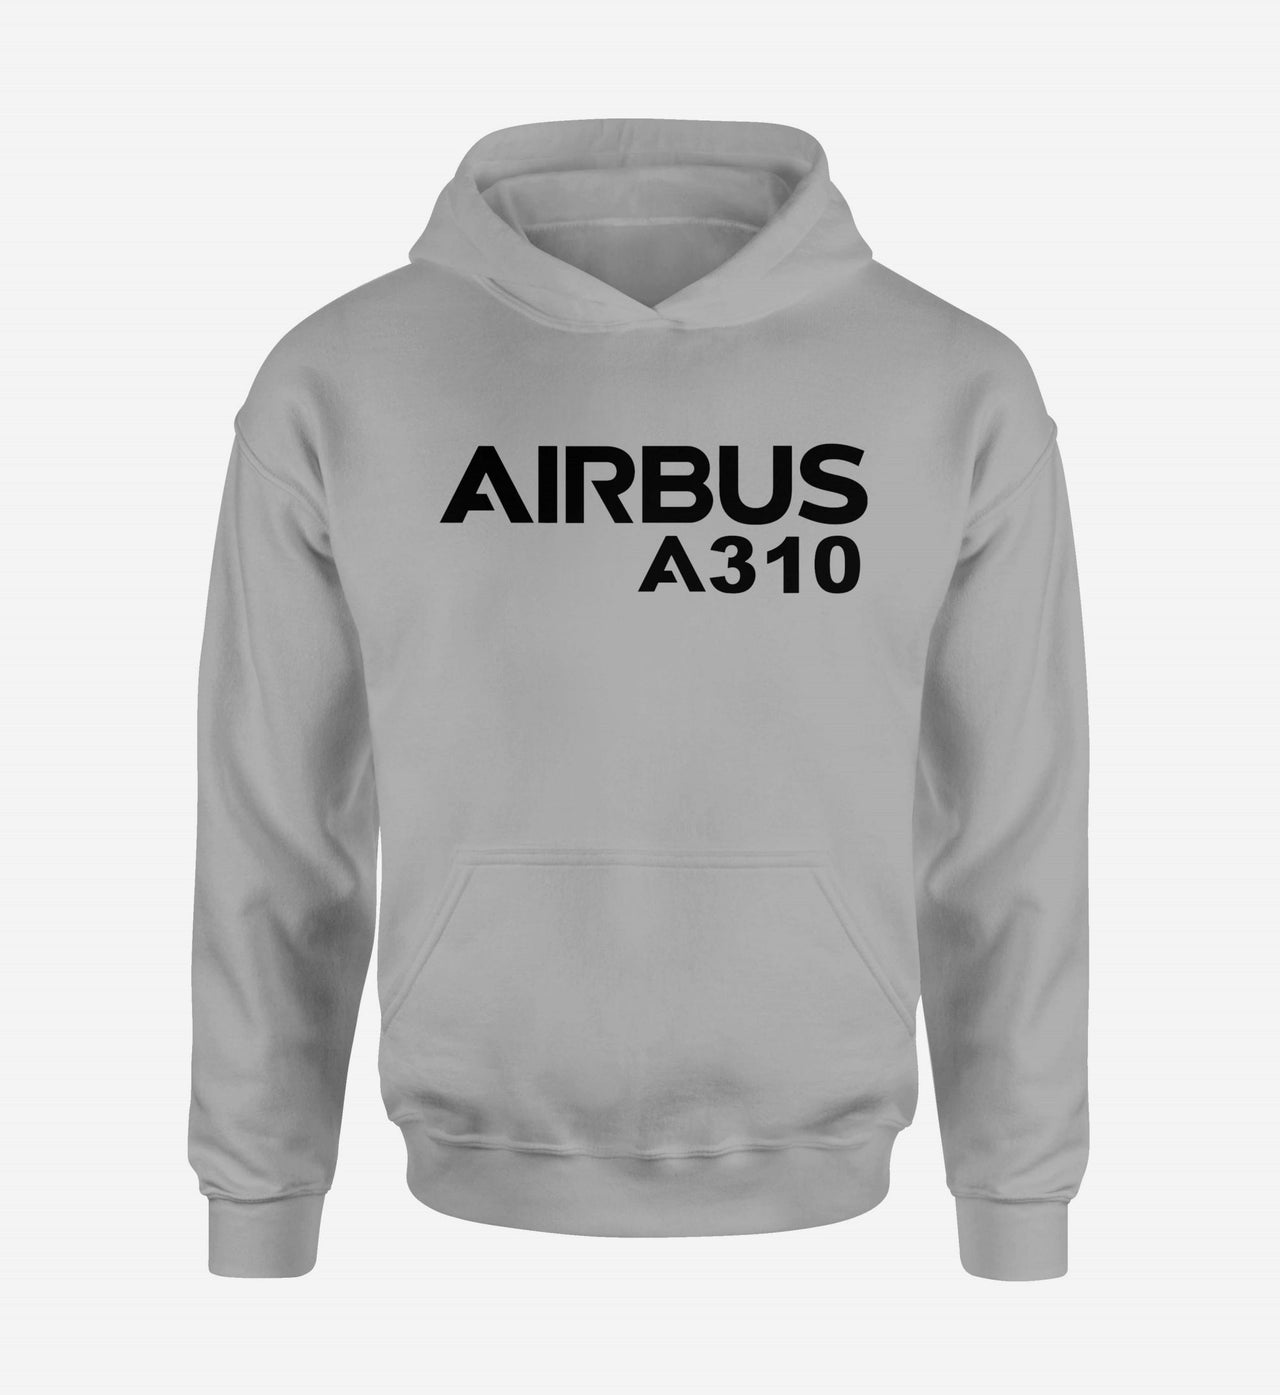 Airbus A310 & Text Designed Hoodies